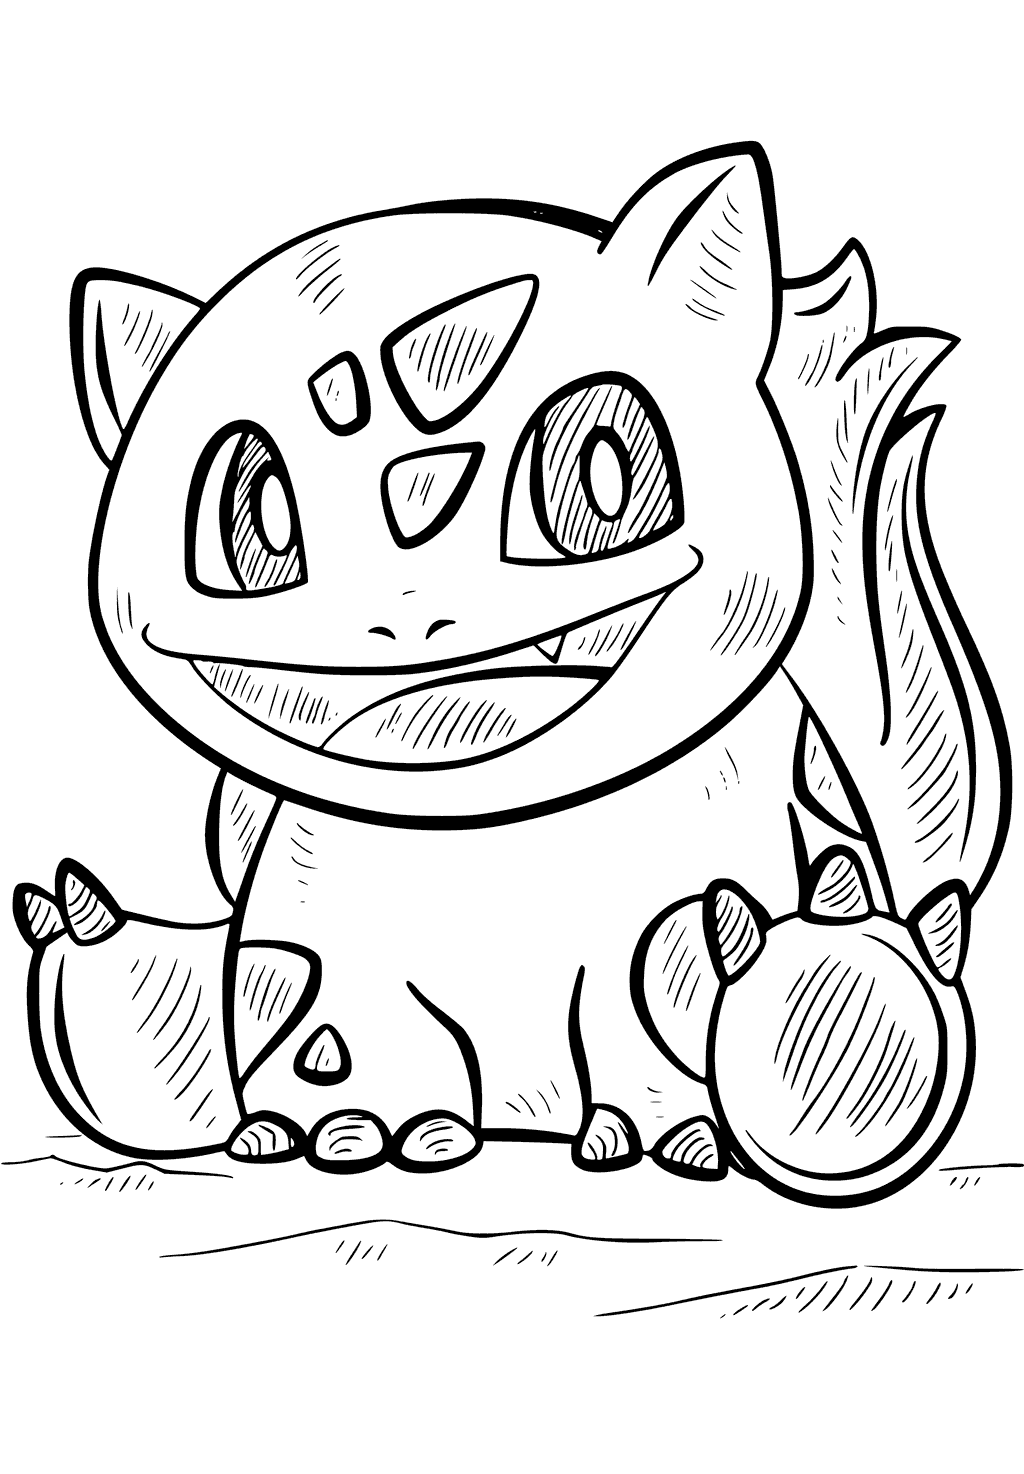 Pokemon Bulbasaur Coloring Pages - Get Coloring Pages